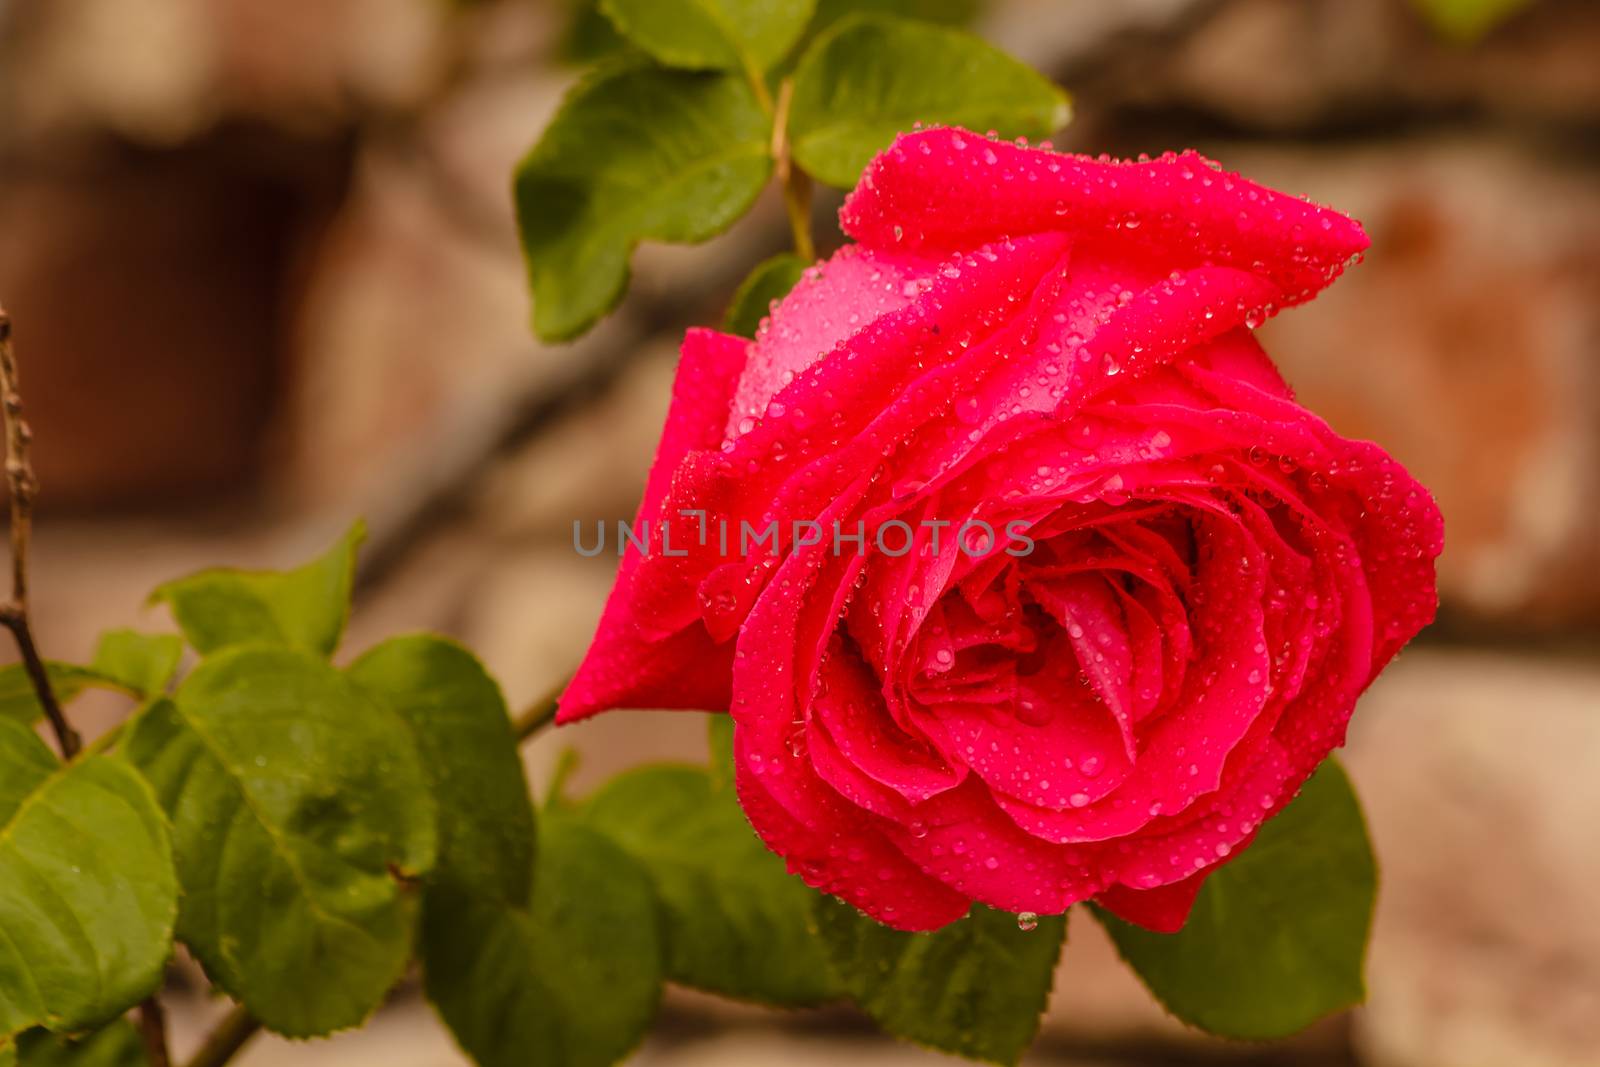 A wet rose after the rain by moorea